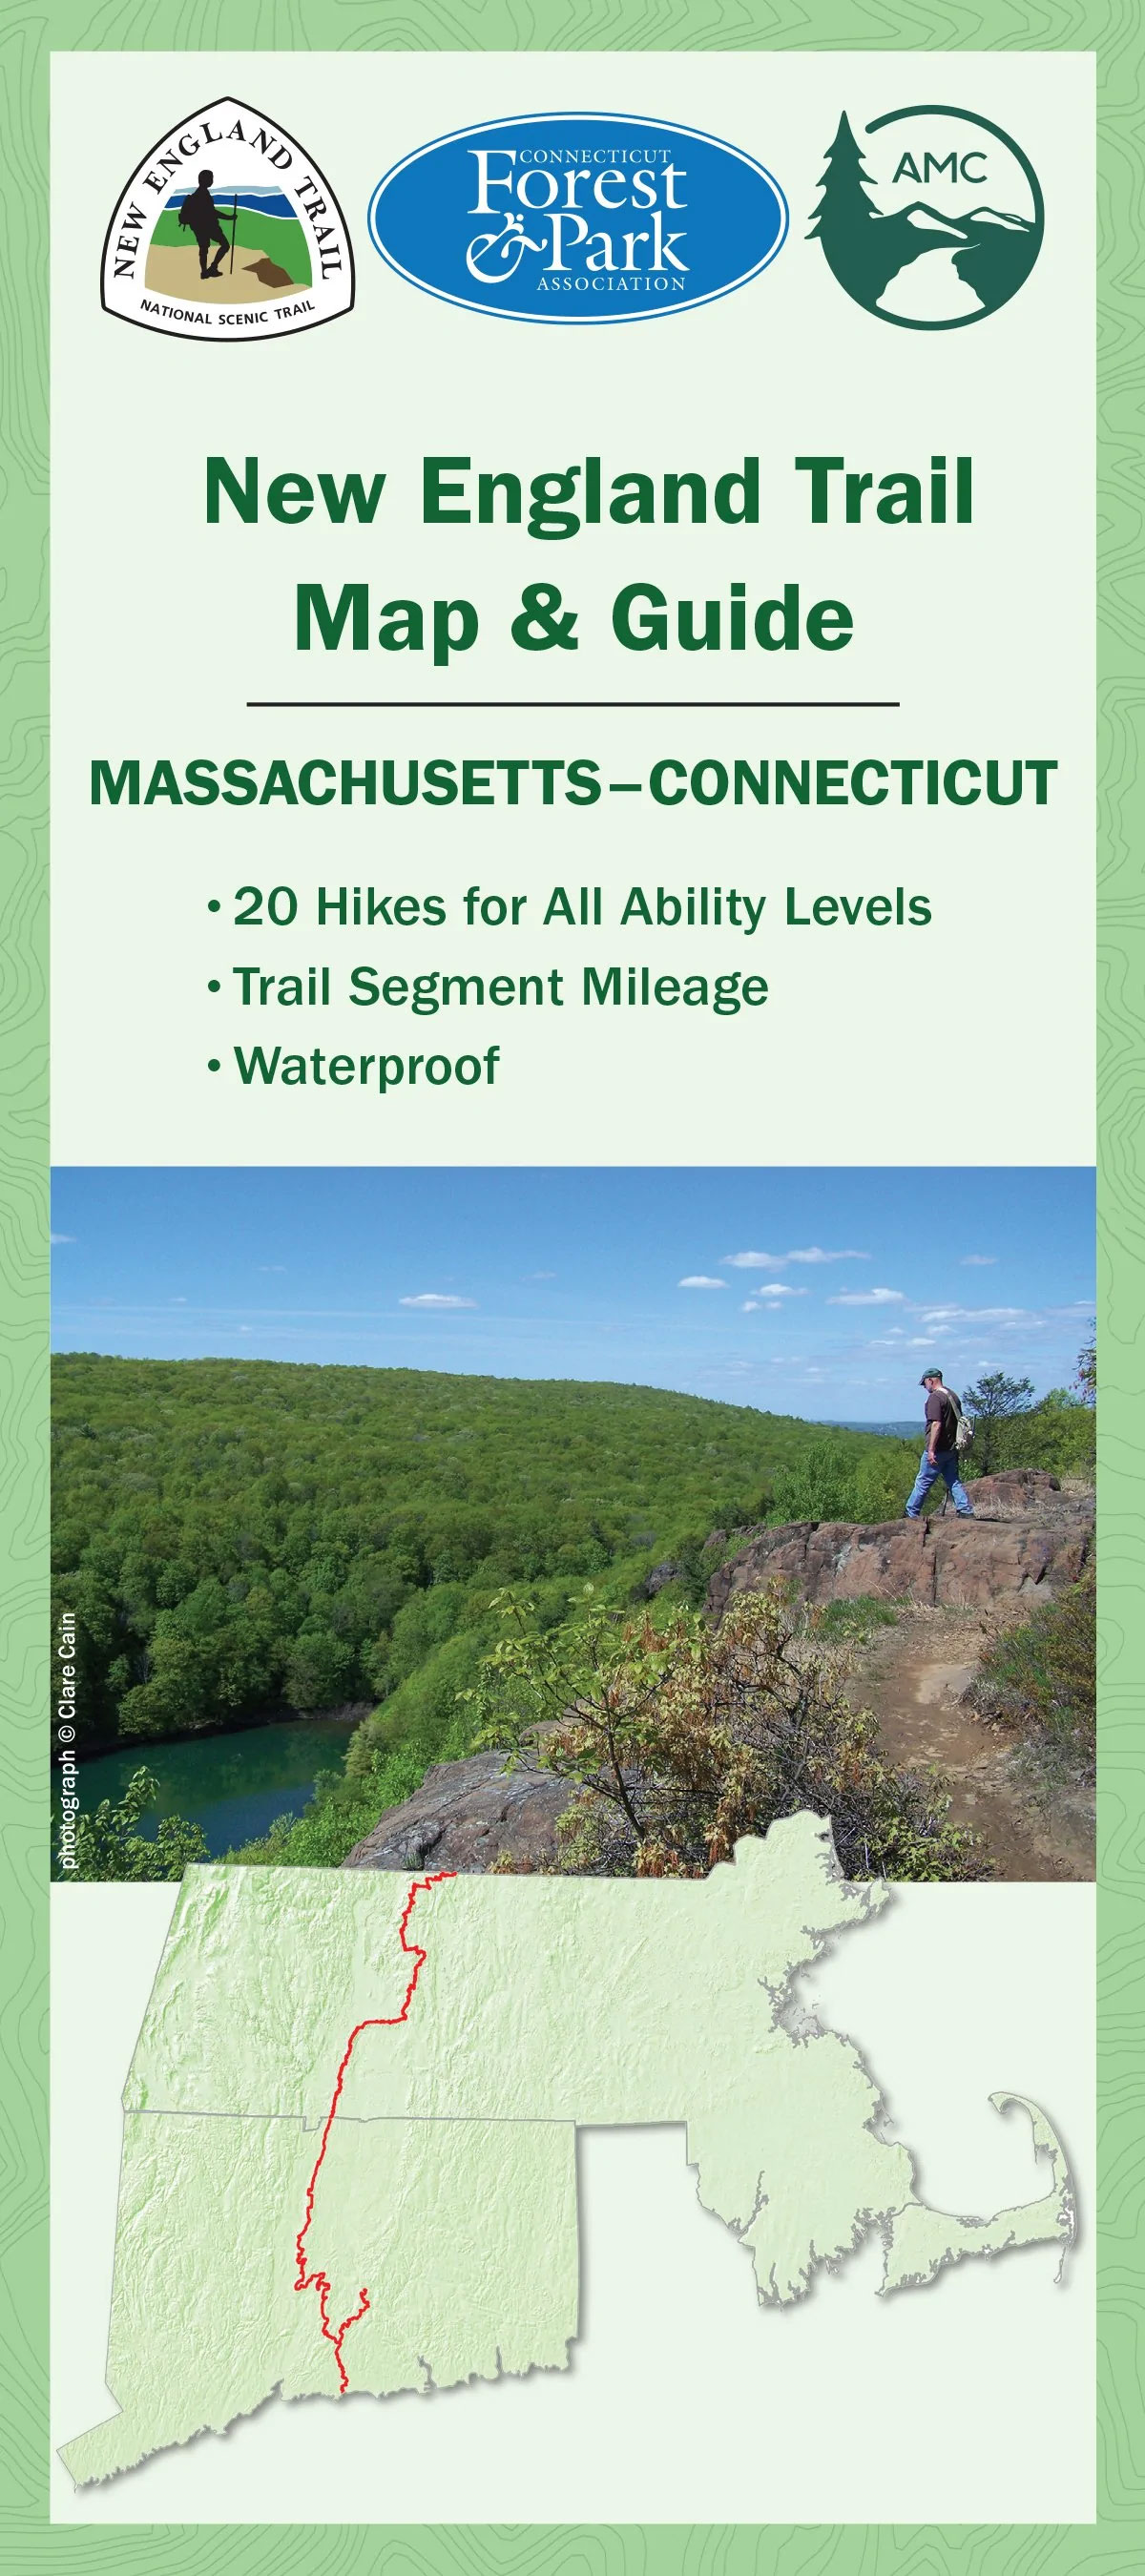 Brochure cover for New England Trail Map & Guide